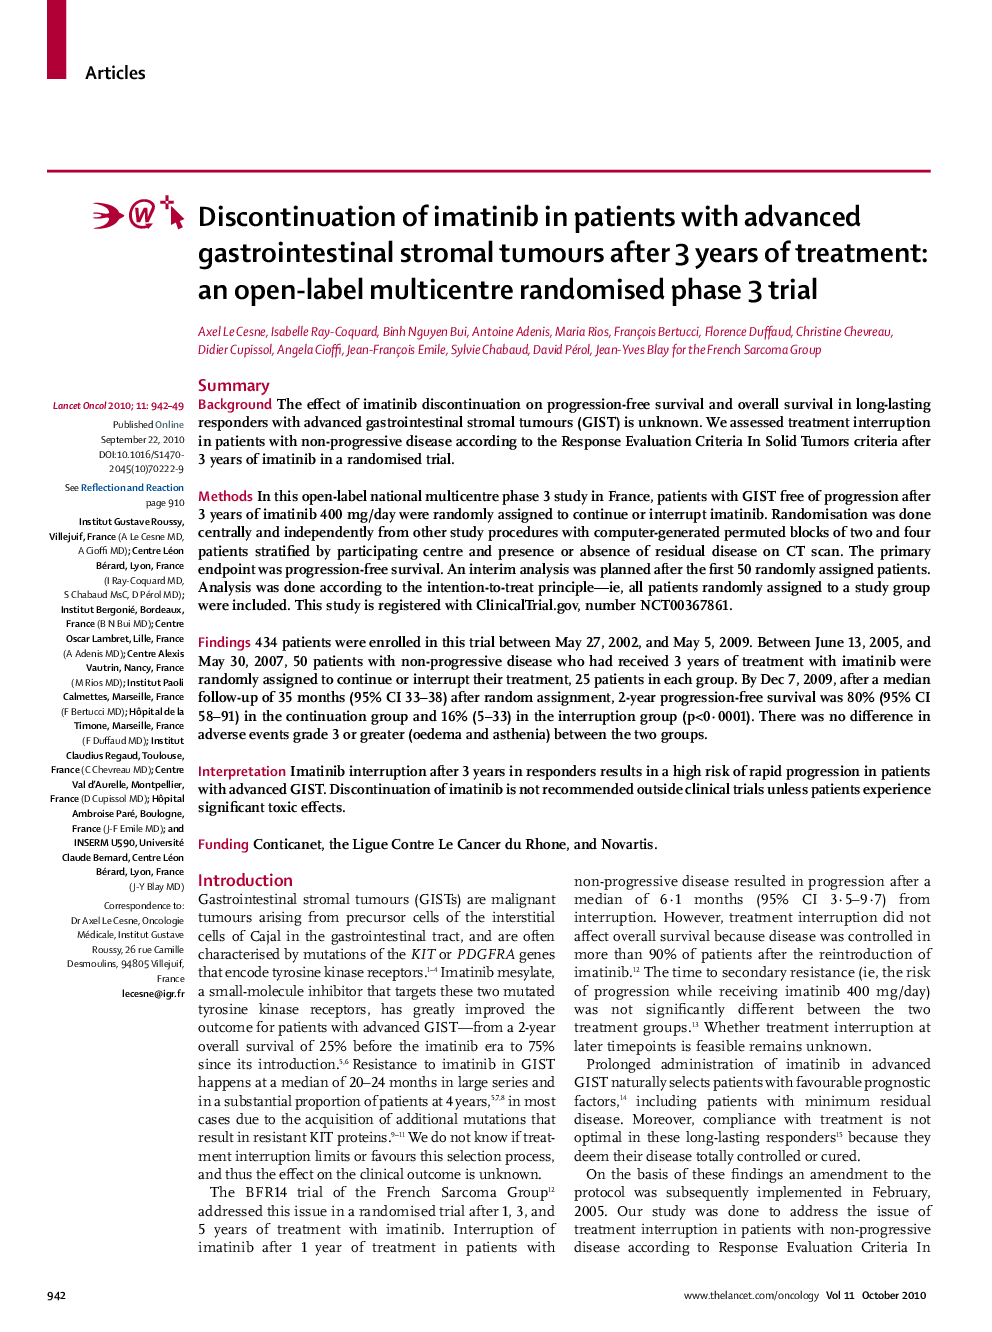 Discontinuation of imatinib in patients with advanced gastrointestinal stromal tumours after 3 years of treatment: an open-label multicentre randomised phase 3 trial